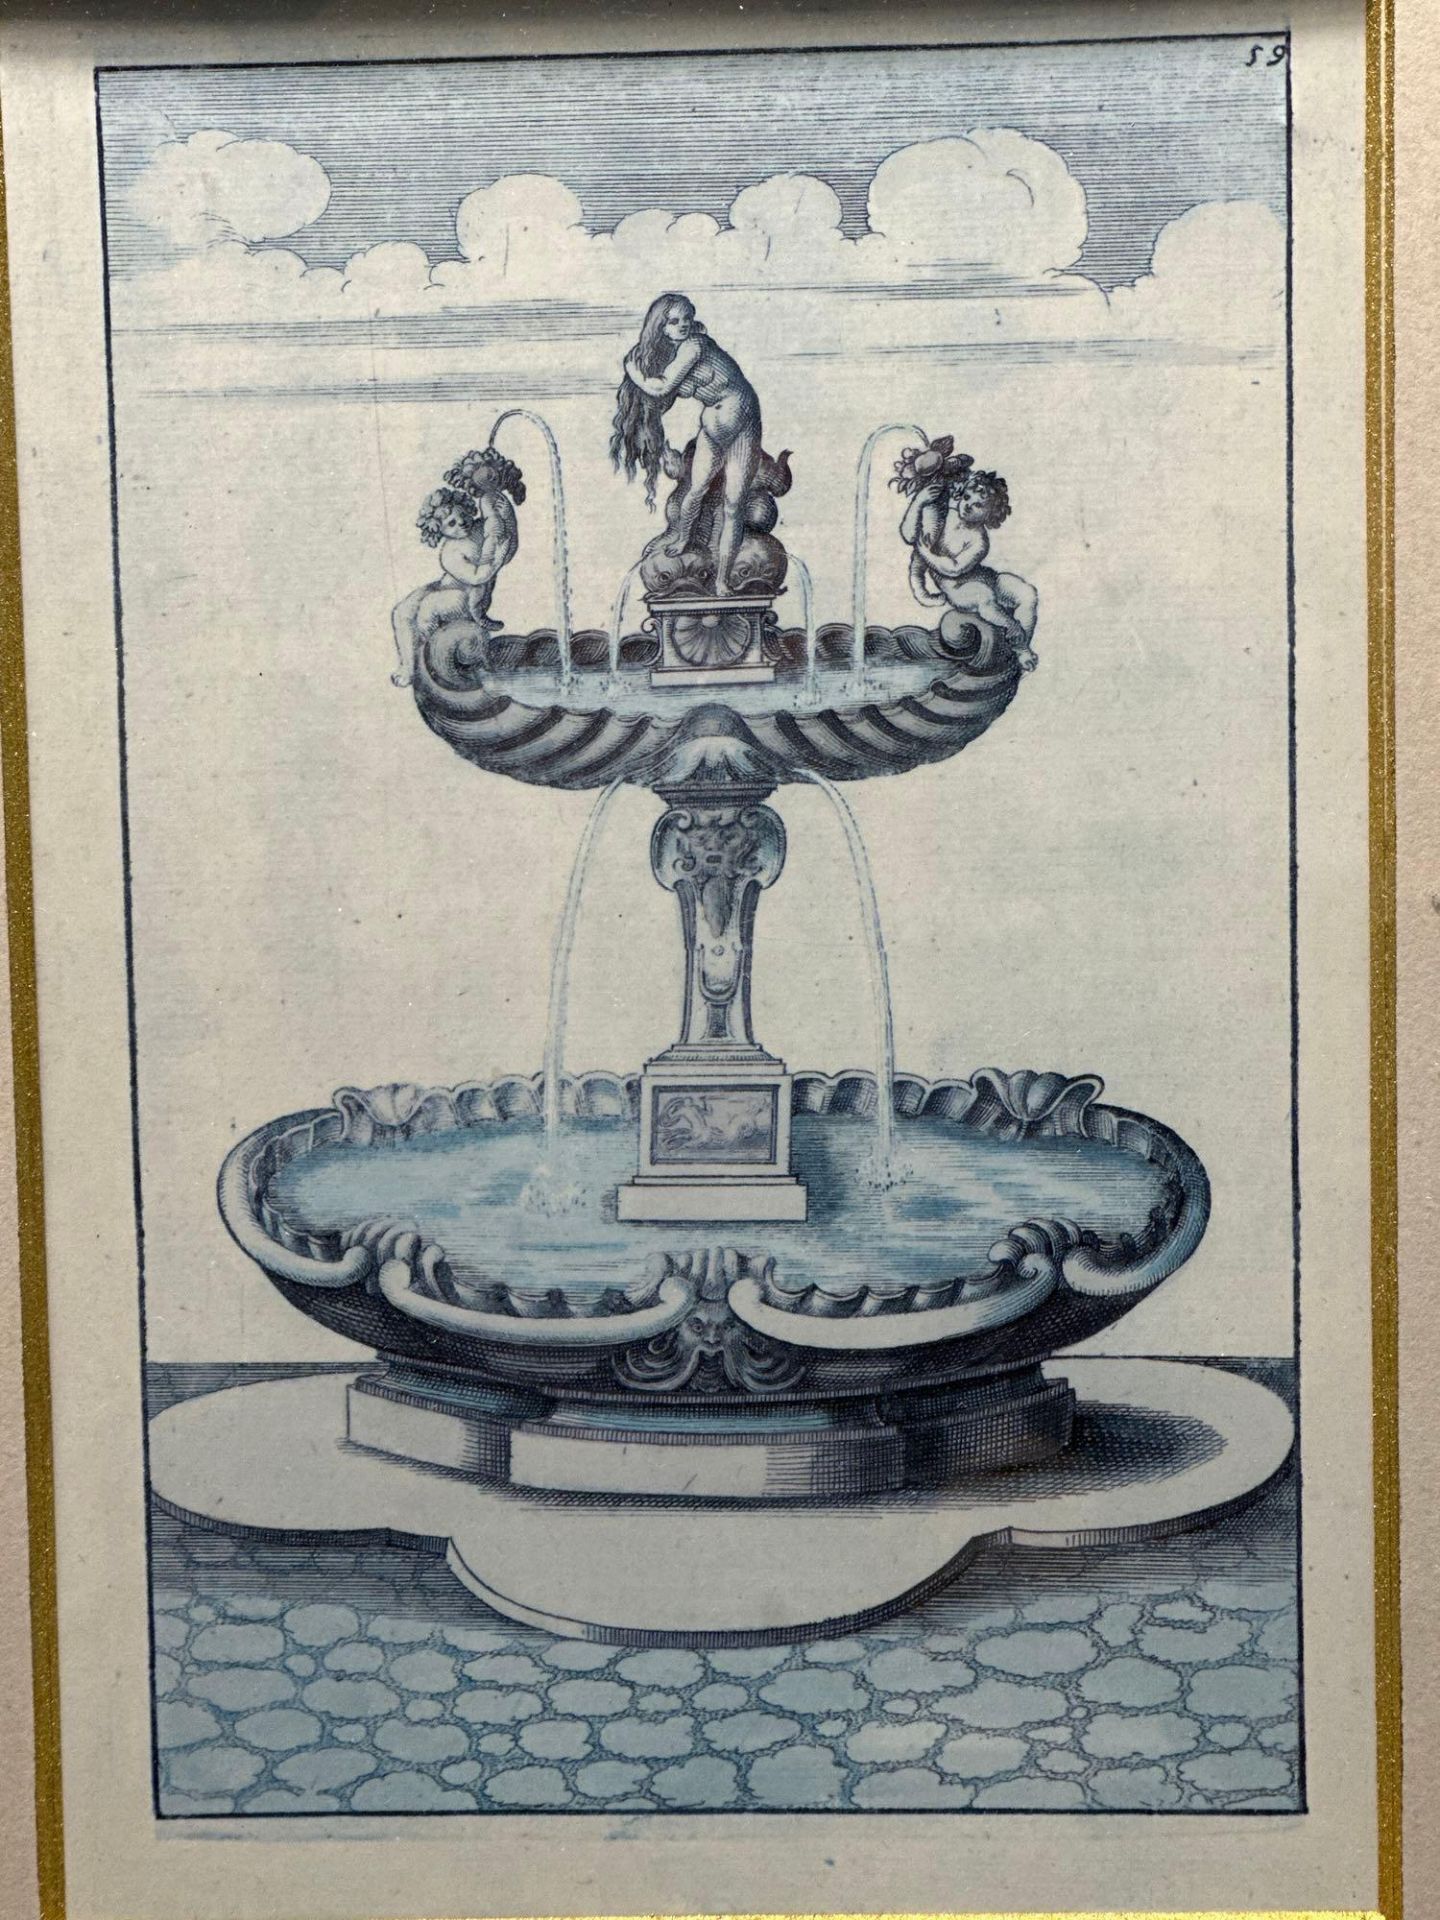 A Set of 4 x Fountain Prints, Architectural Prints By Bockler From Architectura Curiosa Nova 1664 - Image 2 of 9